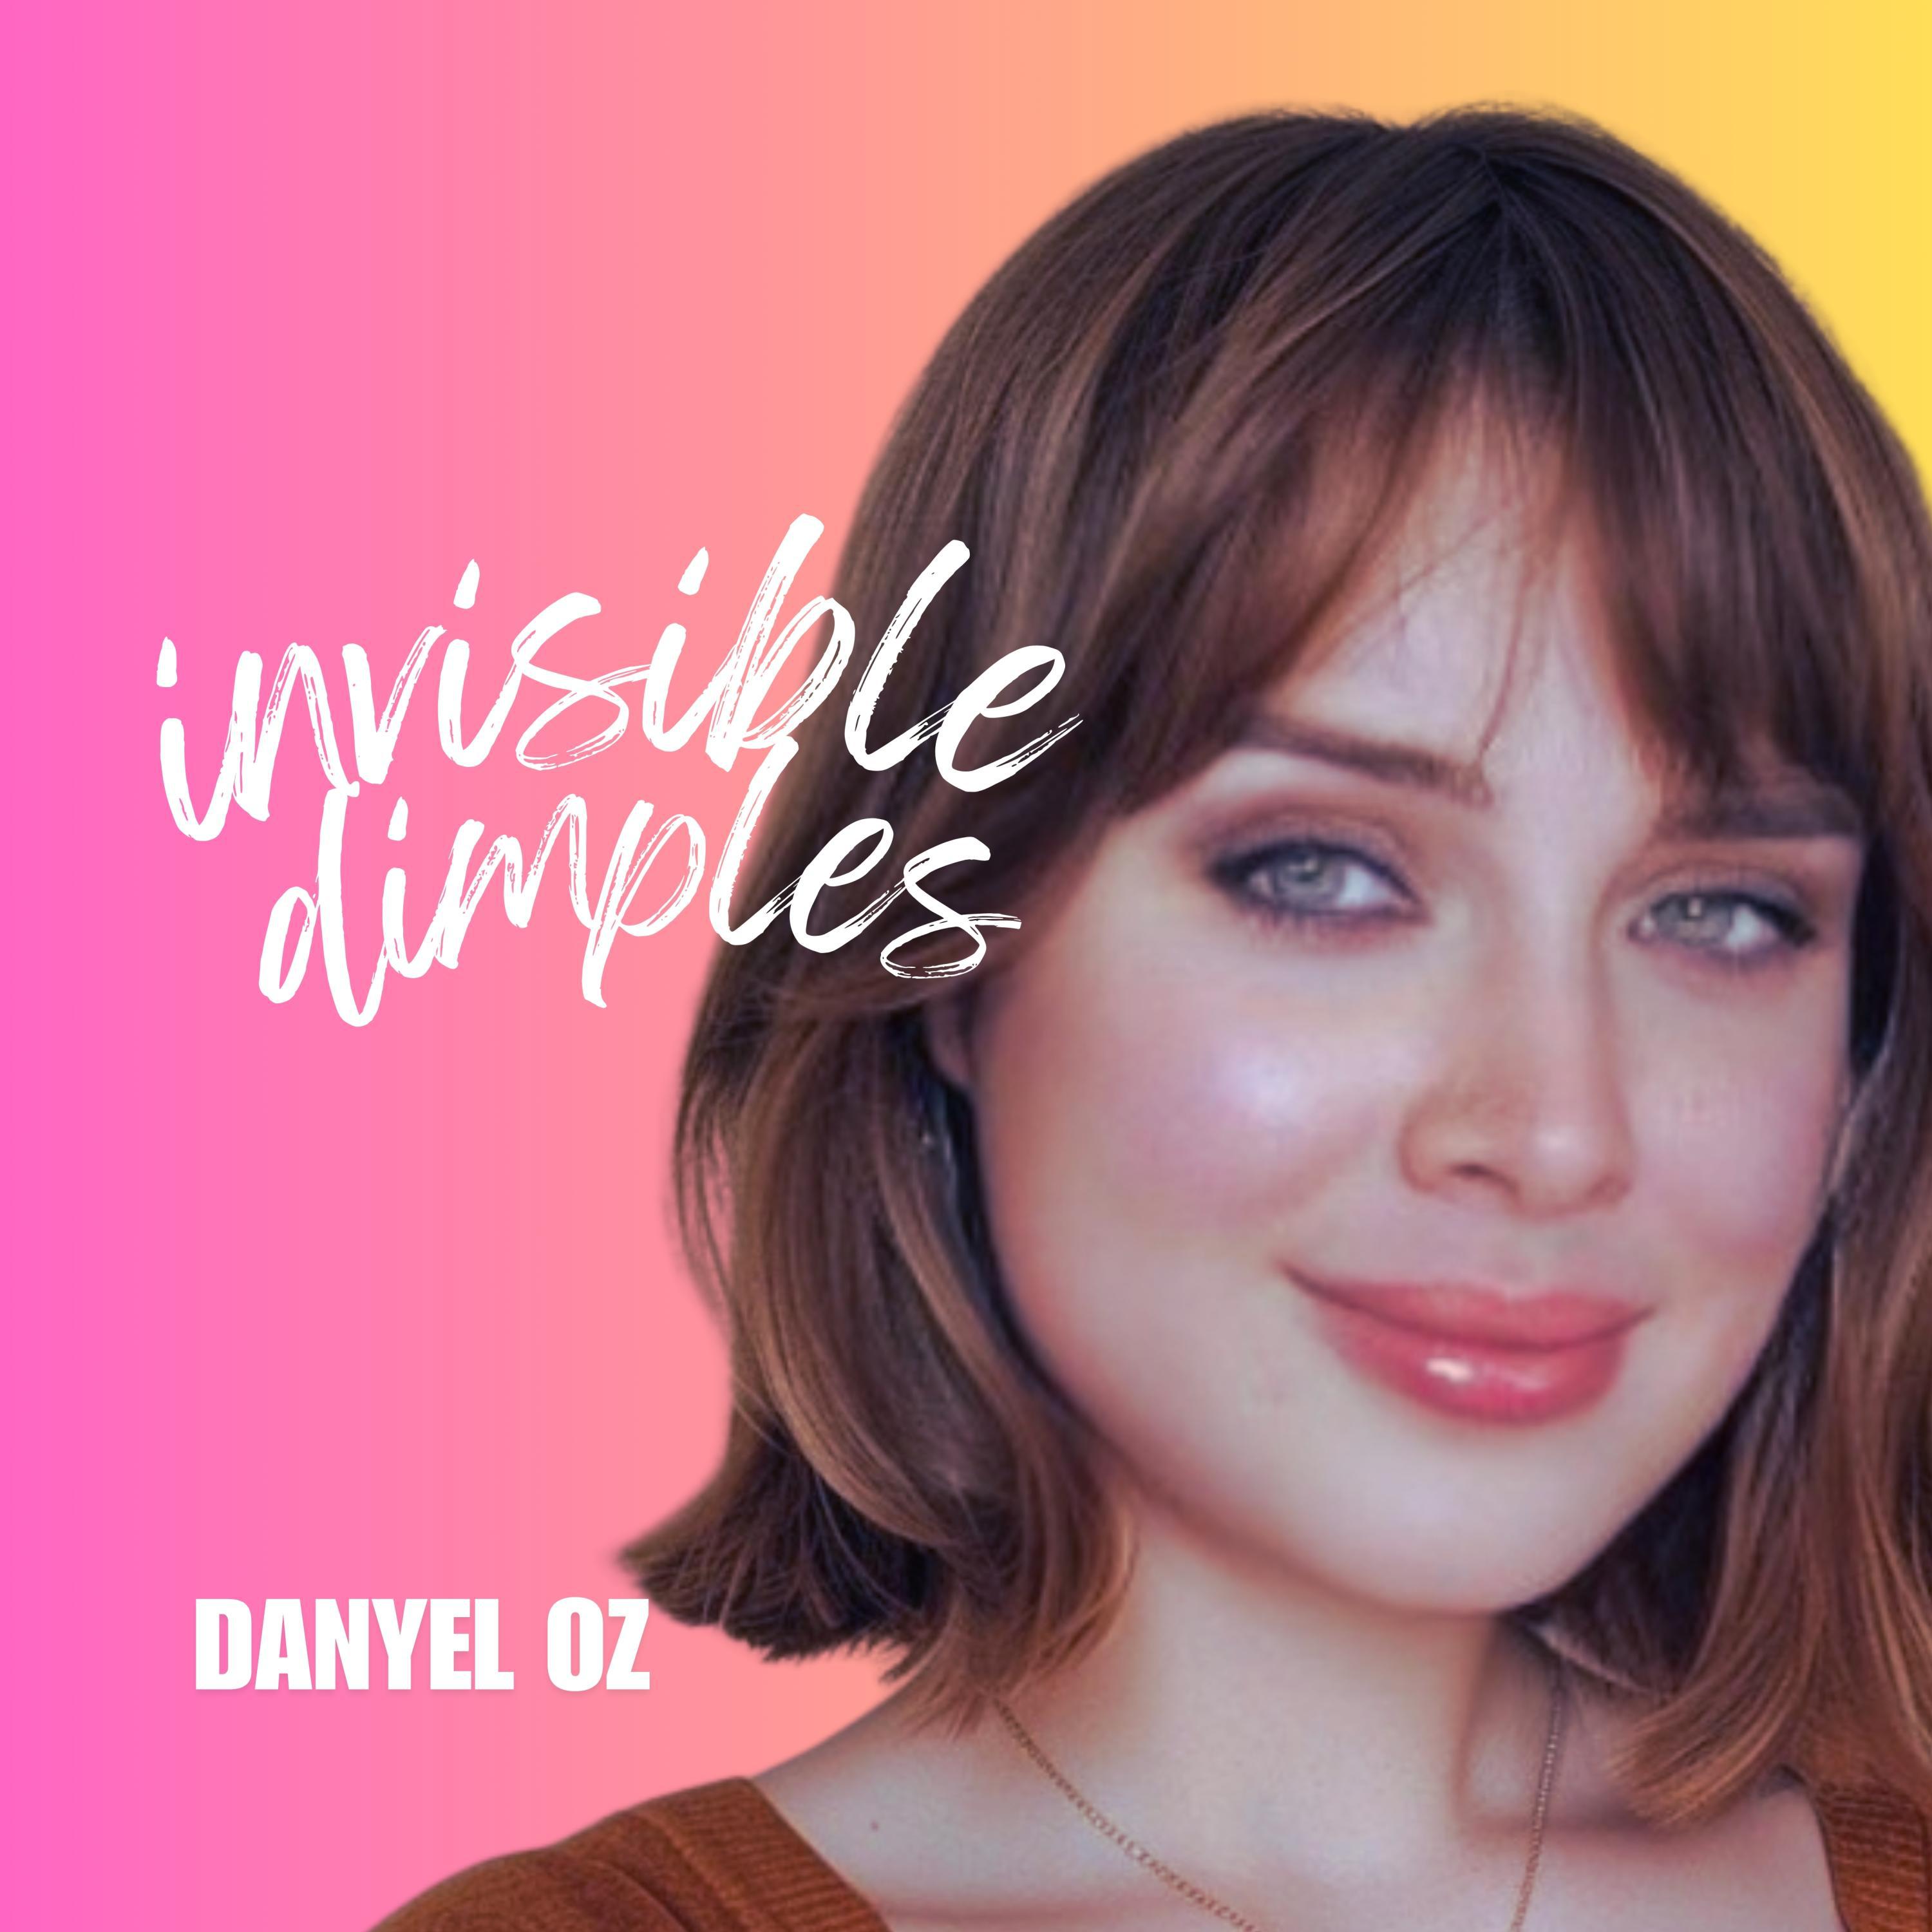 Danyel OZ - Invisible Dimples